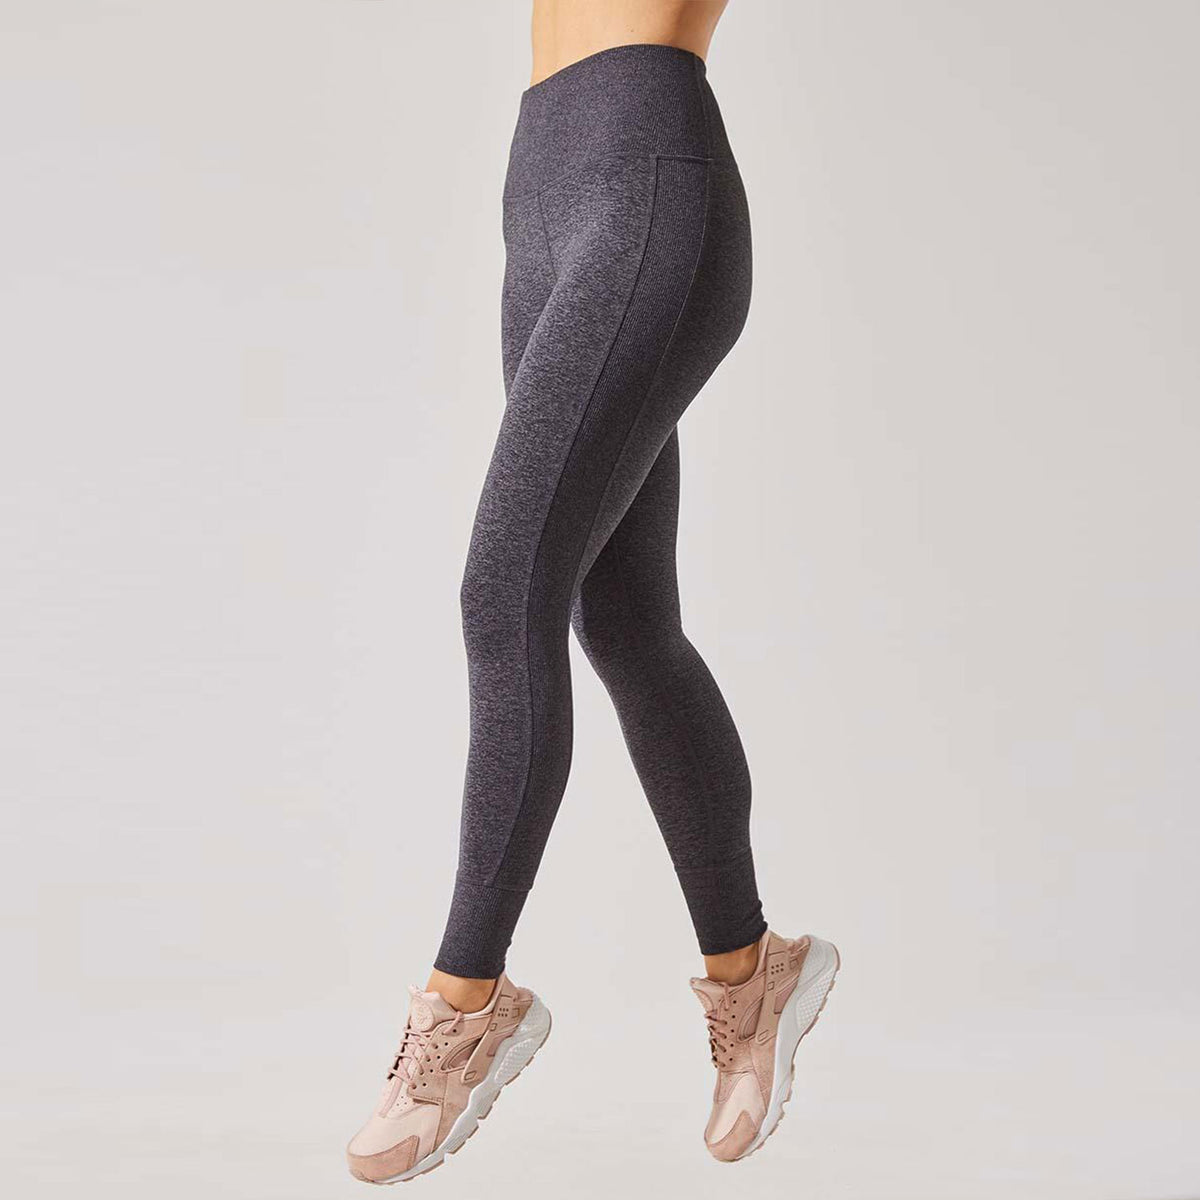 Gymshark Rest Day Sweat Joggers, Women's Fashion, Activewear on